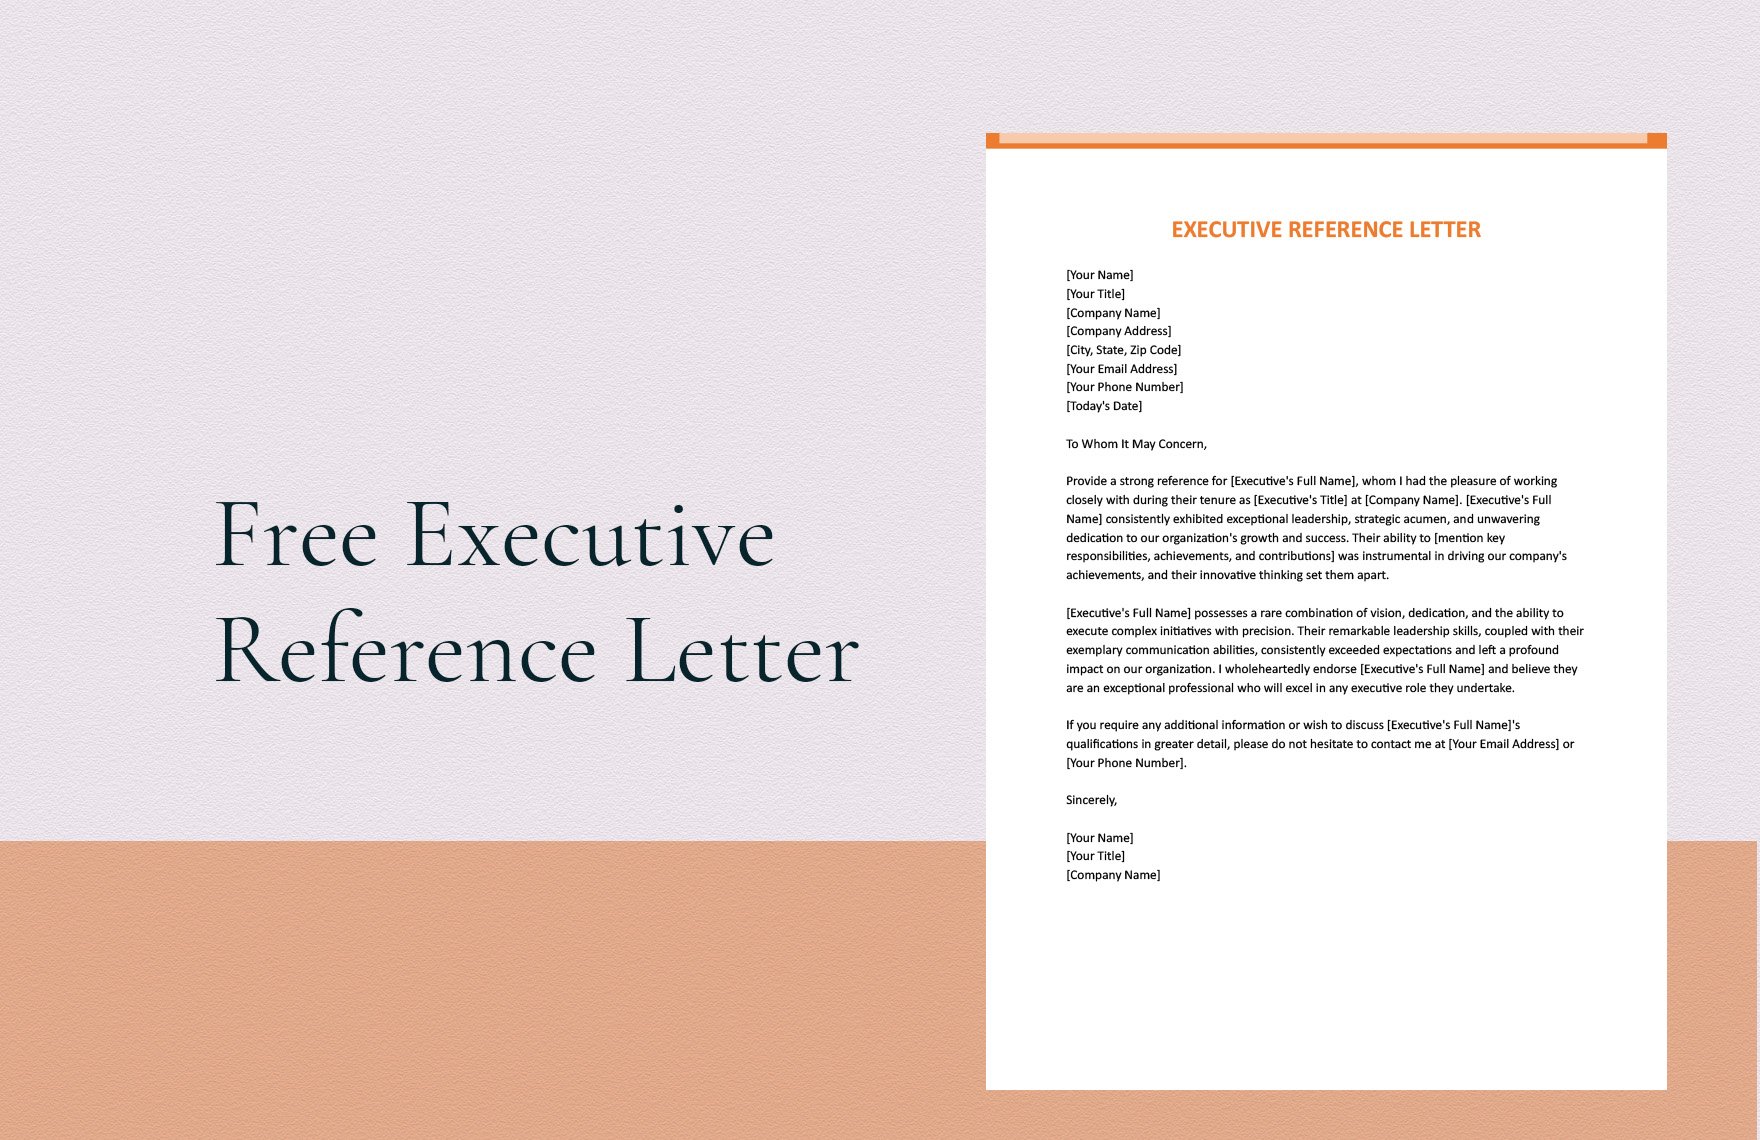 Executive Reference Letter